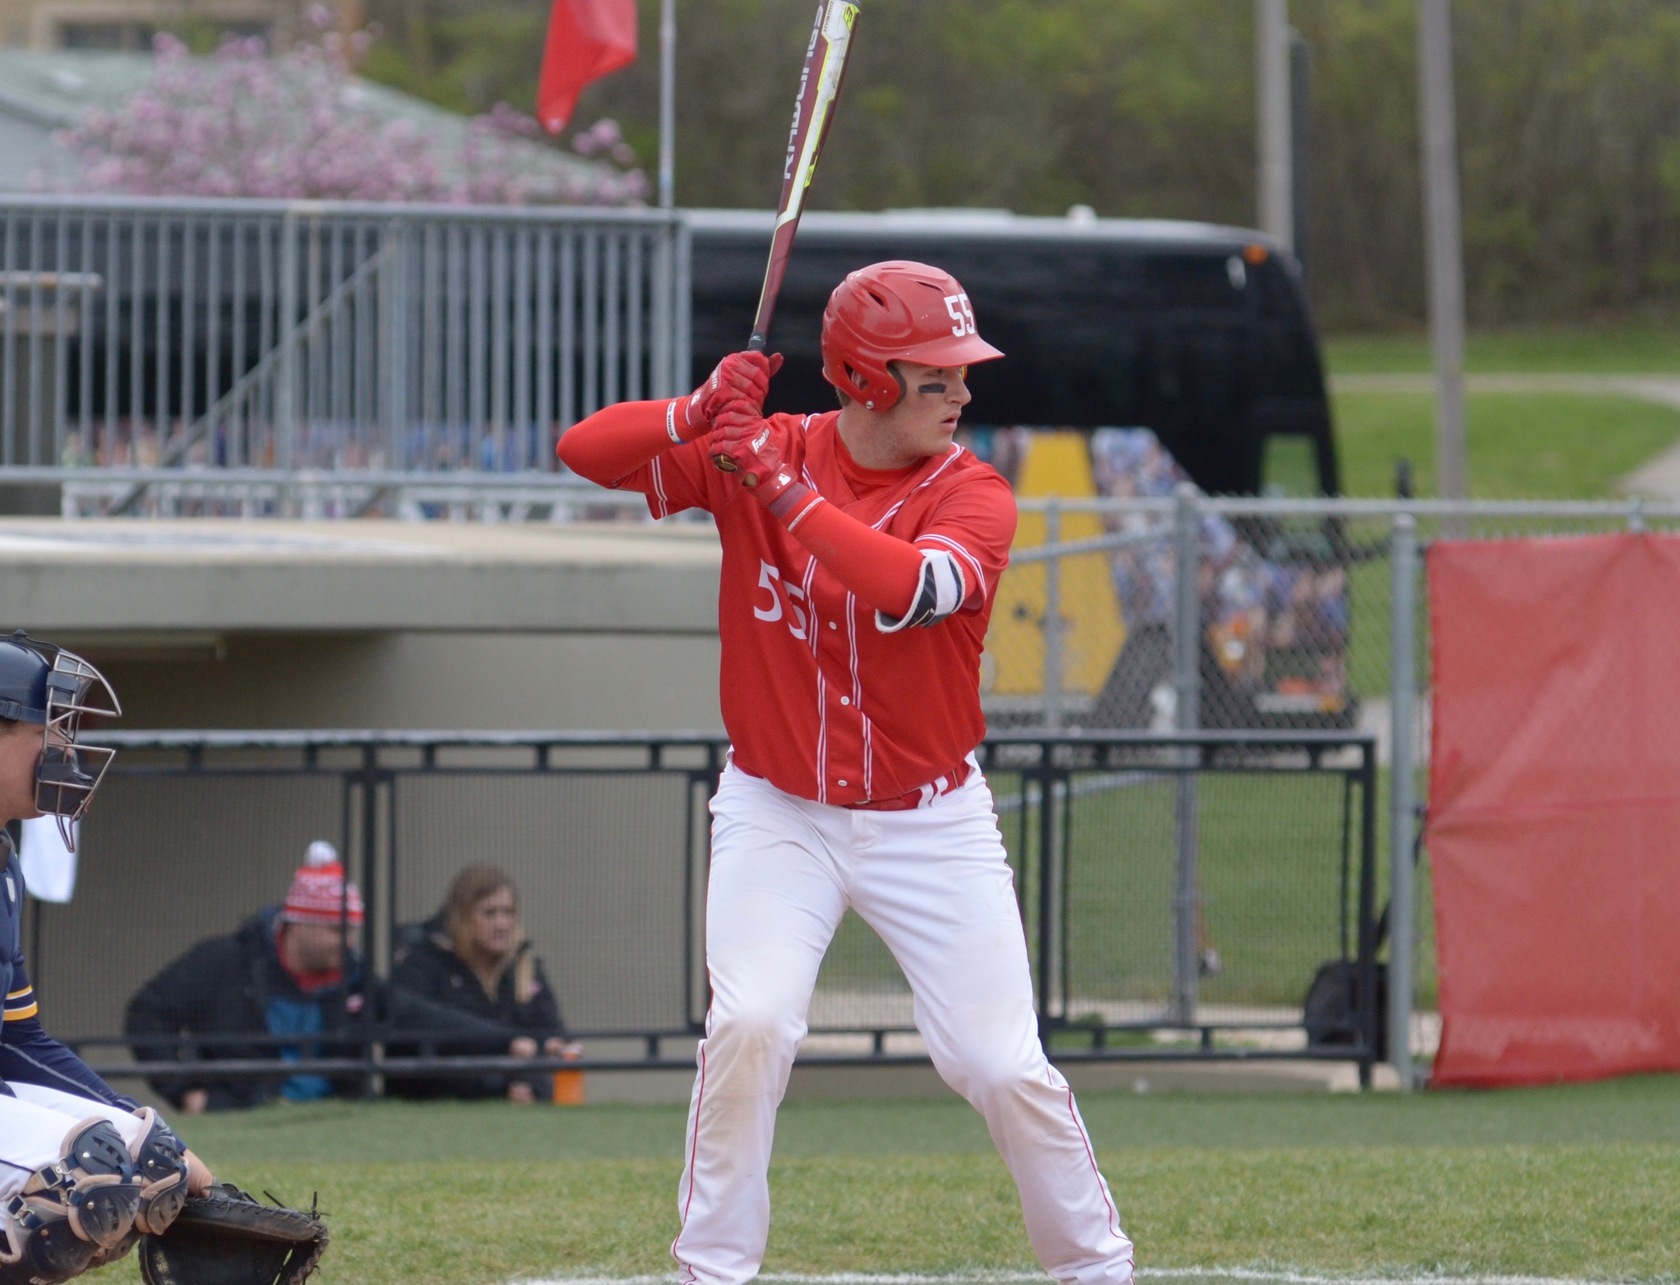 Sophomore Jack Hollinshead combined to go 4-for-7 at the plate on Tuesday (3/19) in a pair of losses at Capital